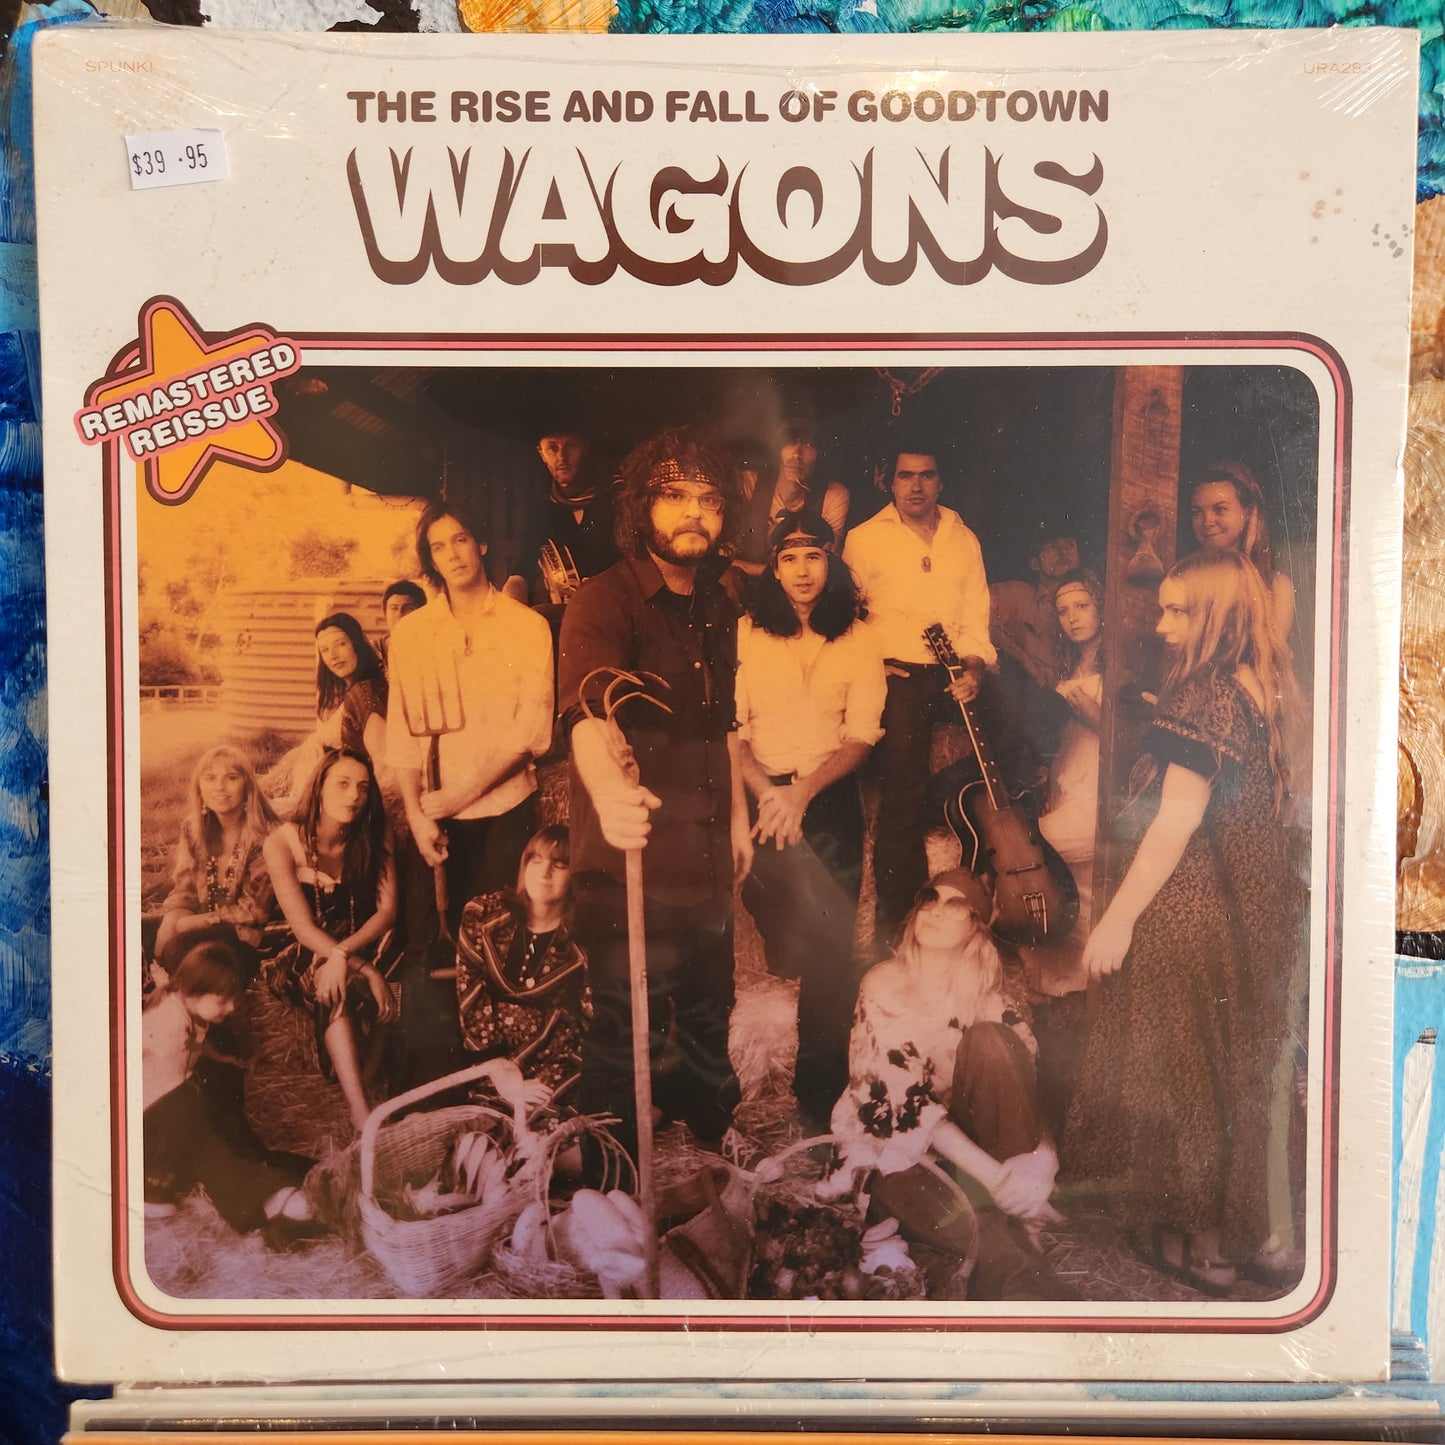 Wagons - The Rise and Fall of Goodtown - Vinyl LP